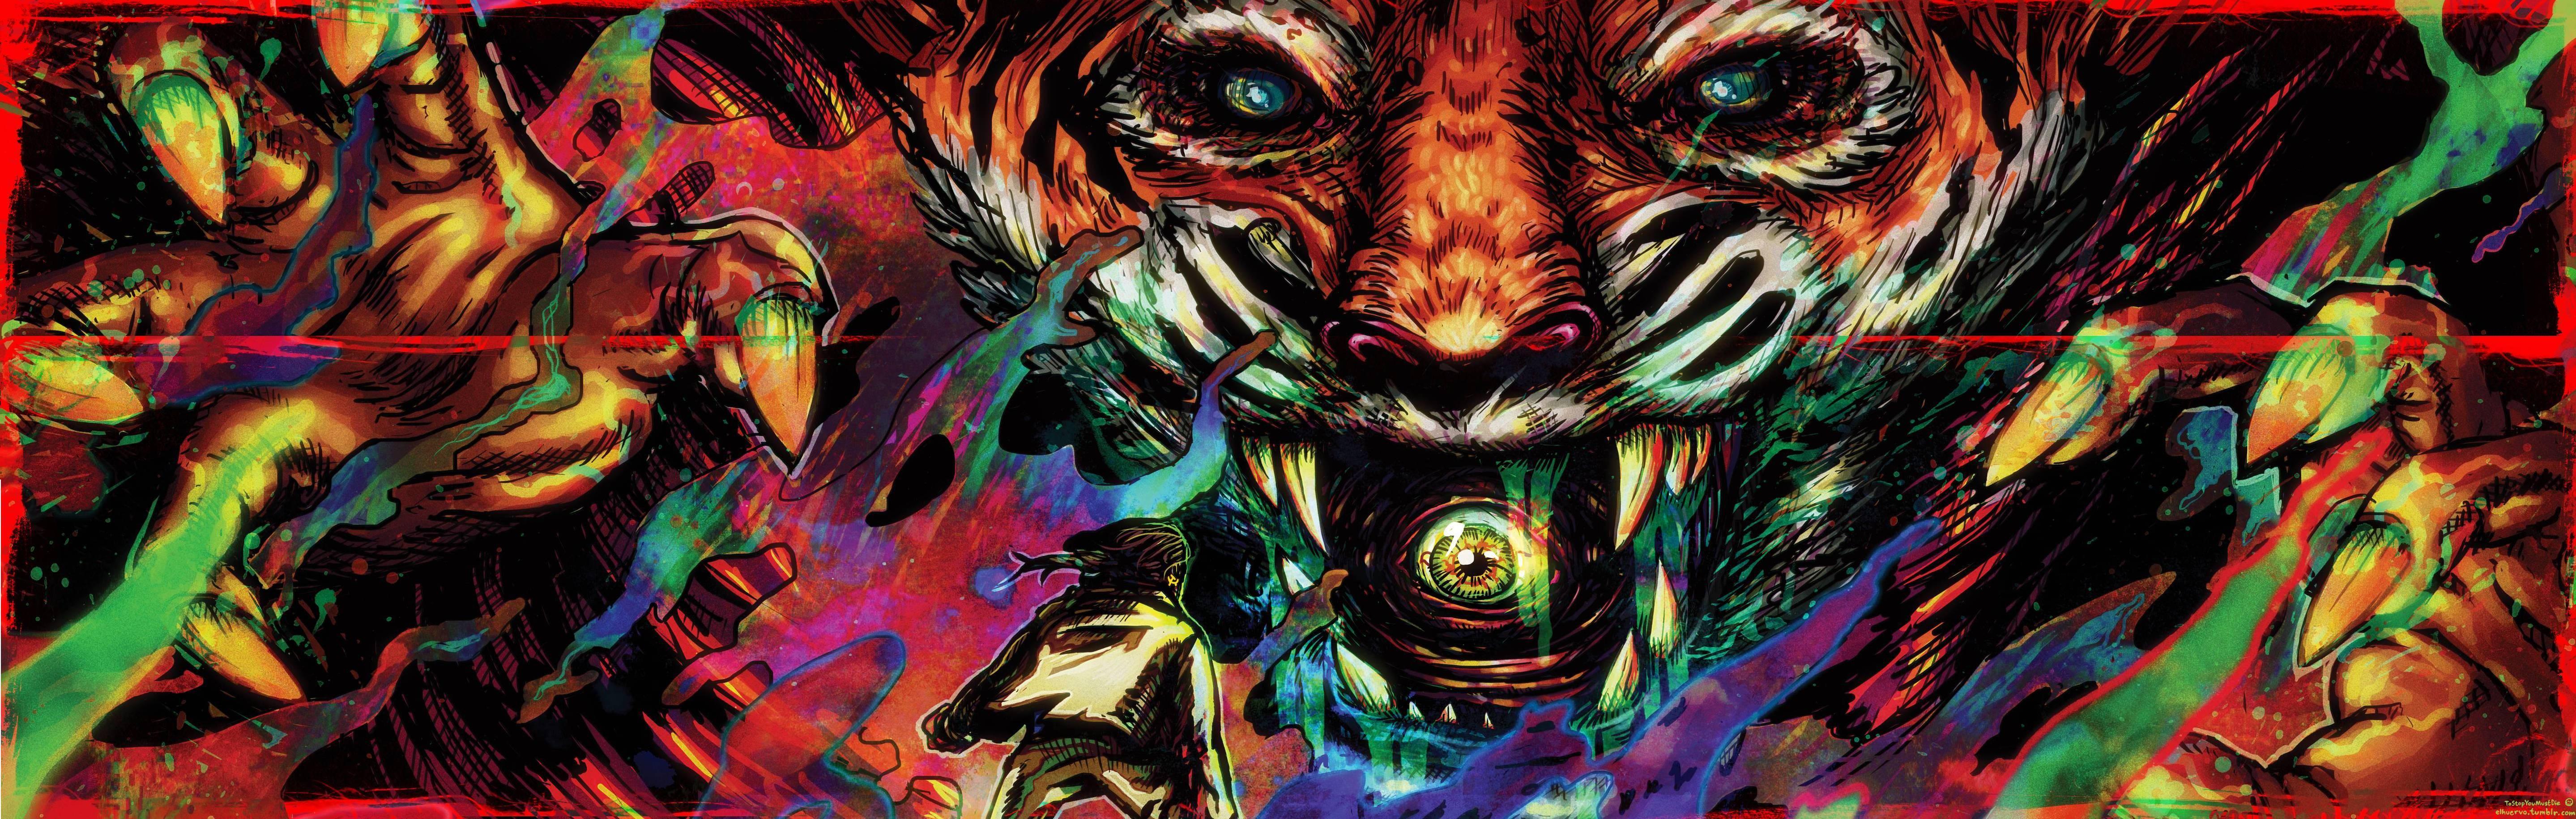 HD wallpaper, 5756X1831 High Resolution Wallpapers Widescreen Hotline Miami 2 Wrong Number